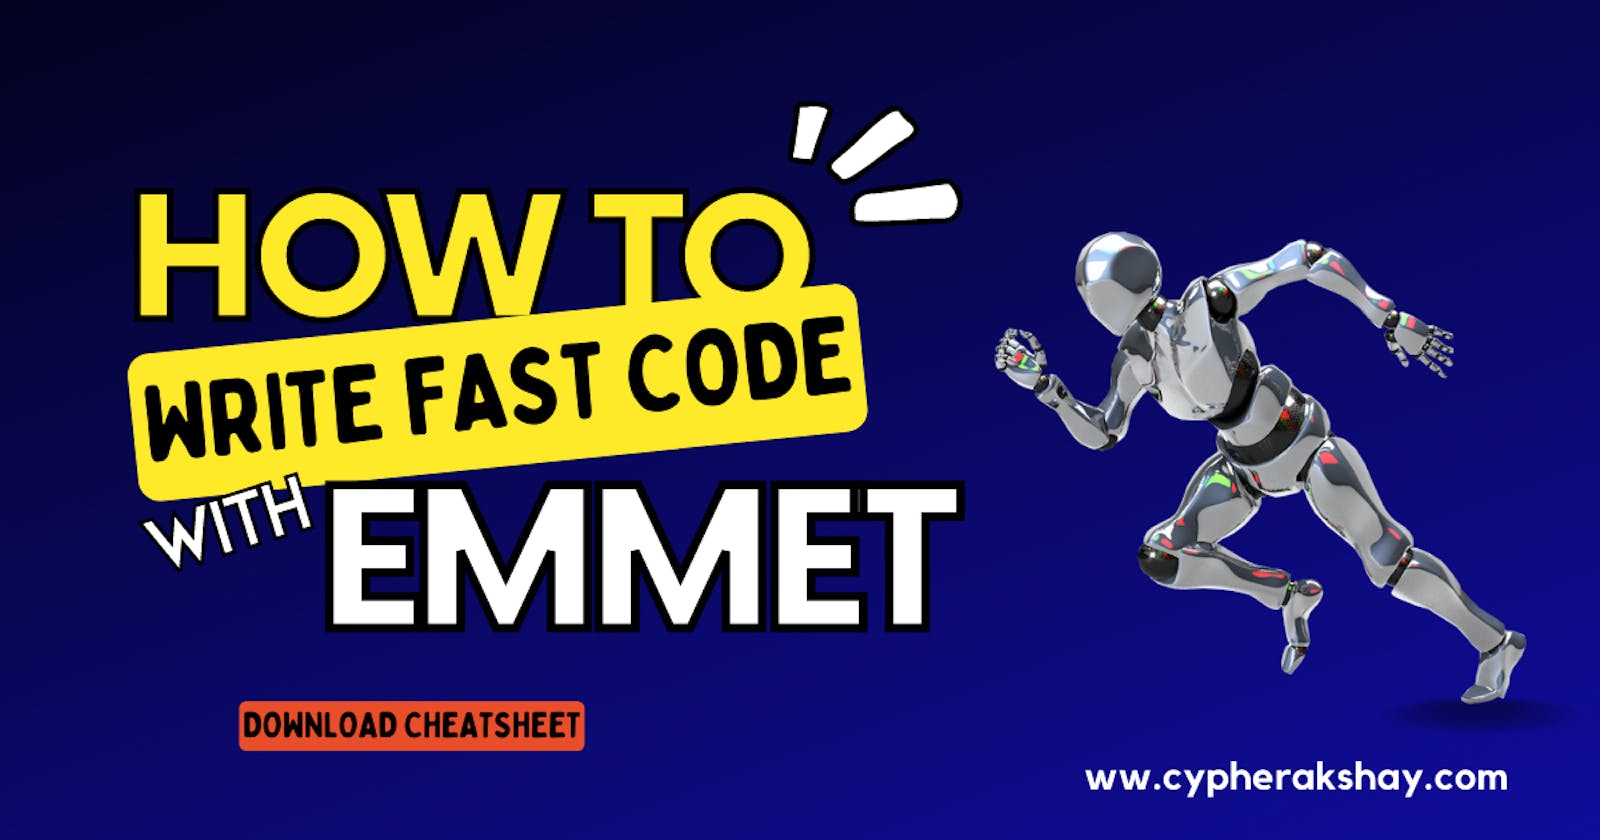 How to write fast code with Emmet